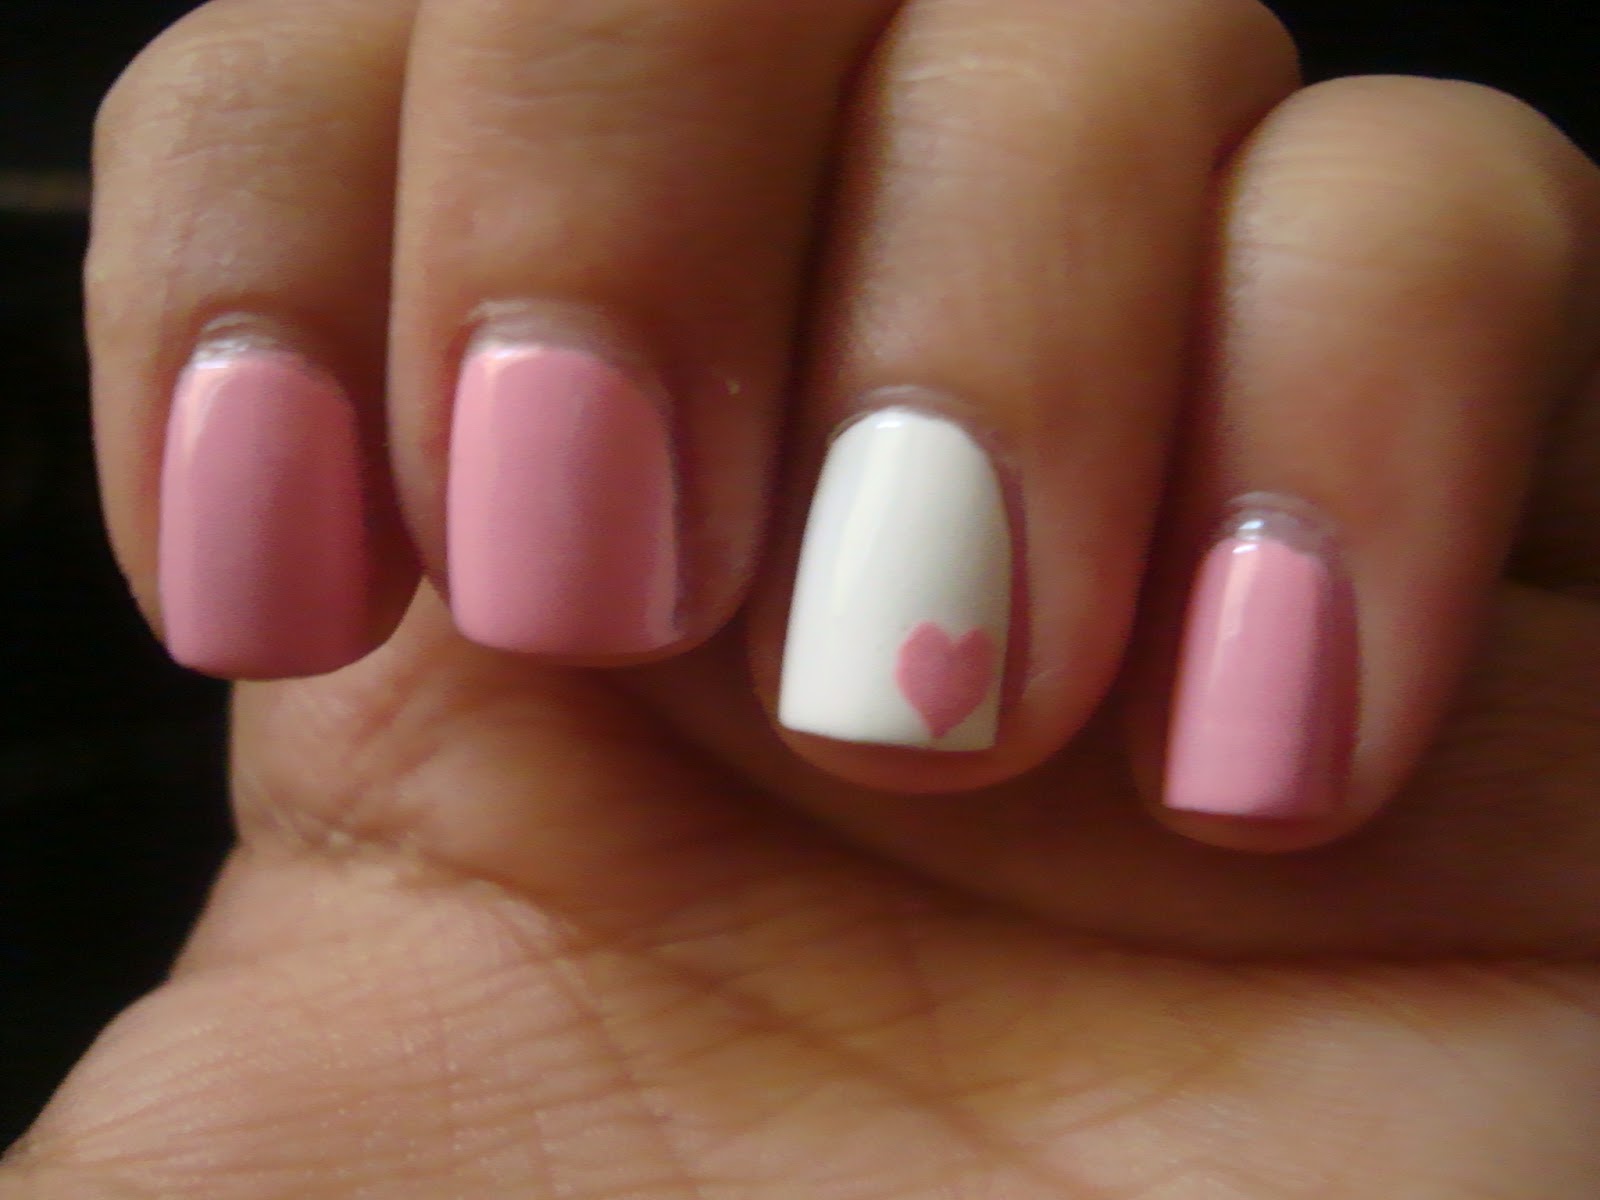 4. 25+ Love Nail Designs for Valentine's Day - Cute Nail Art Ideas for February - wide 8